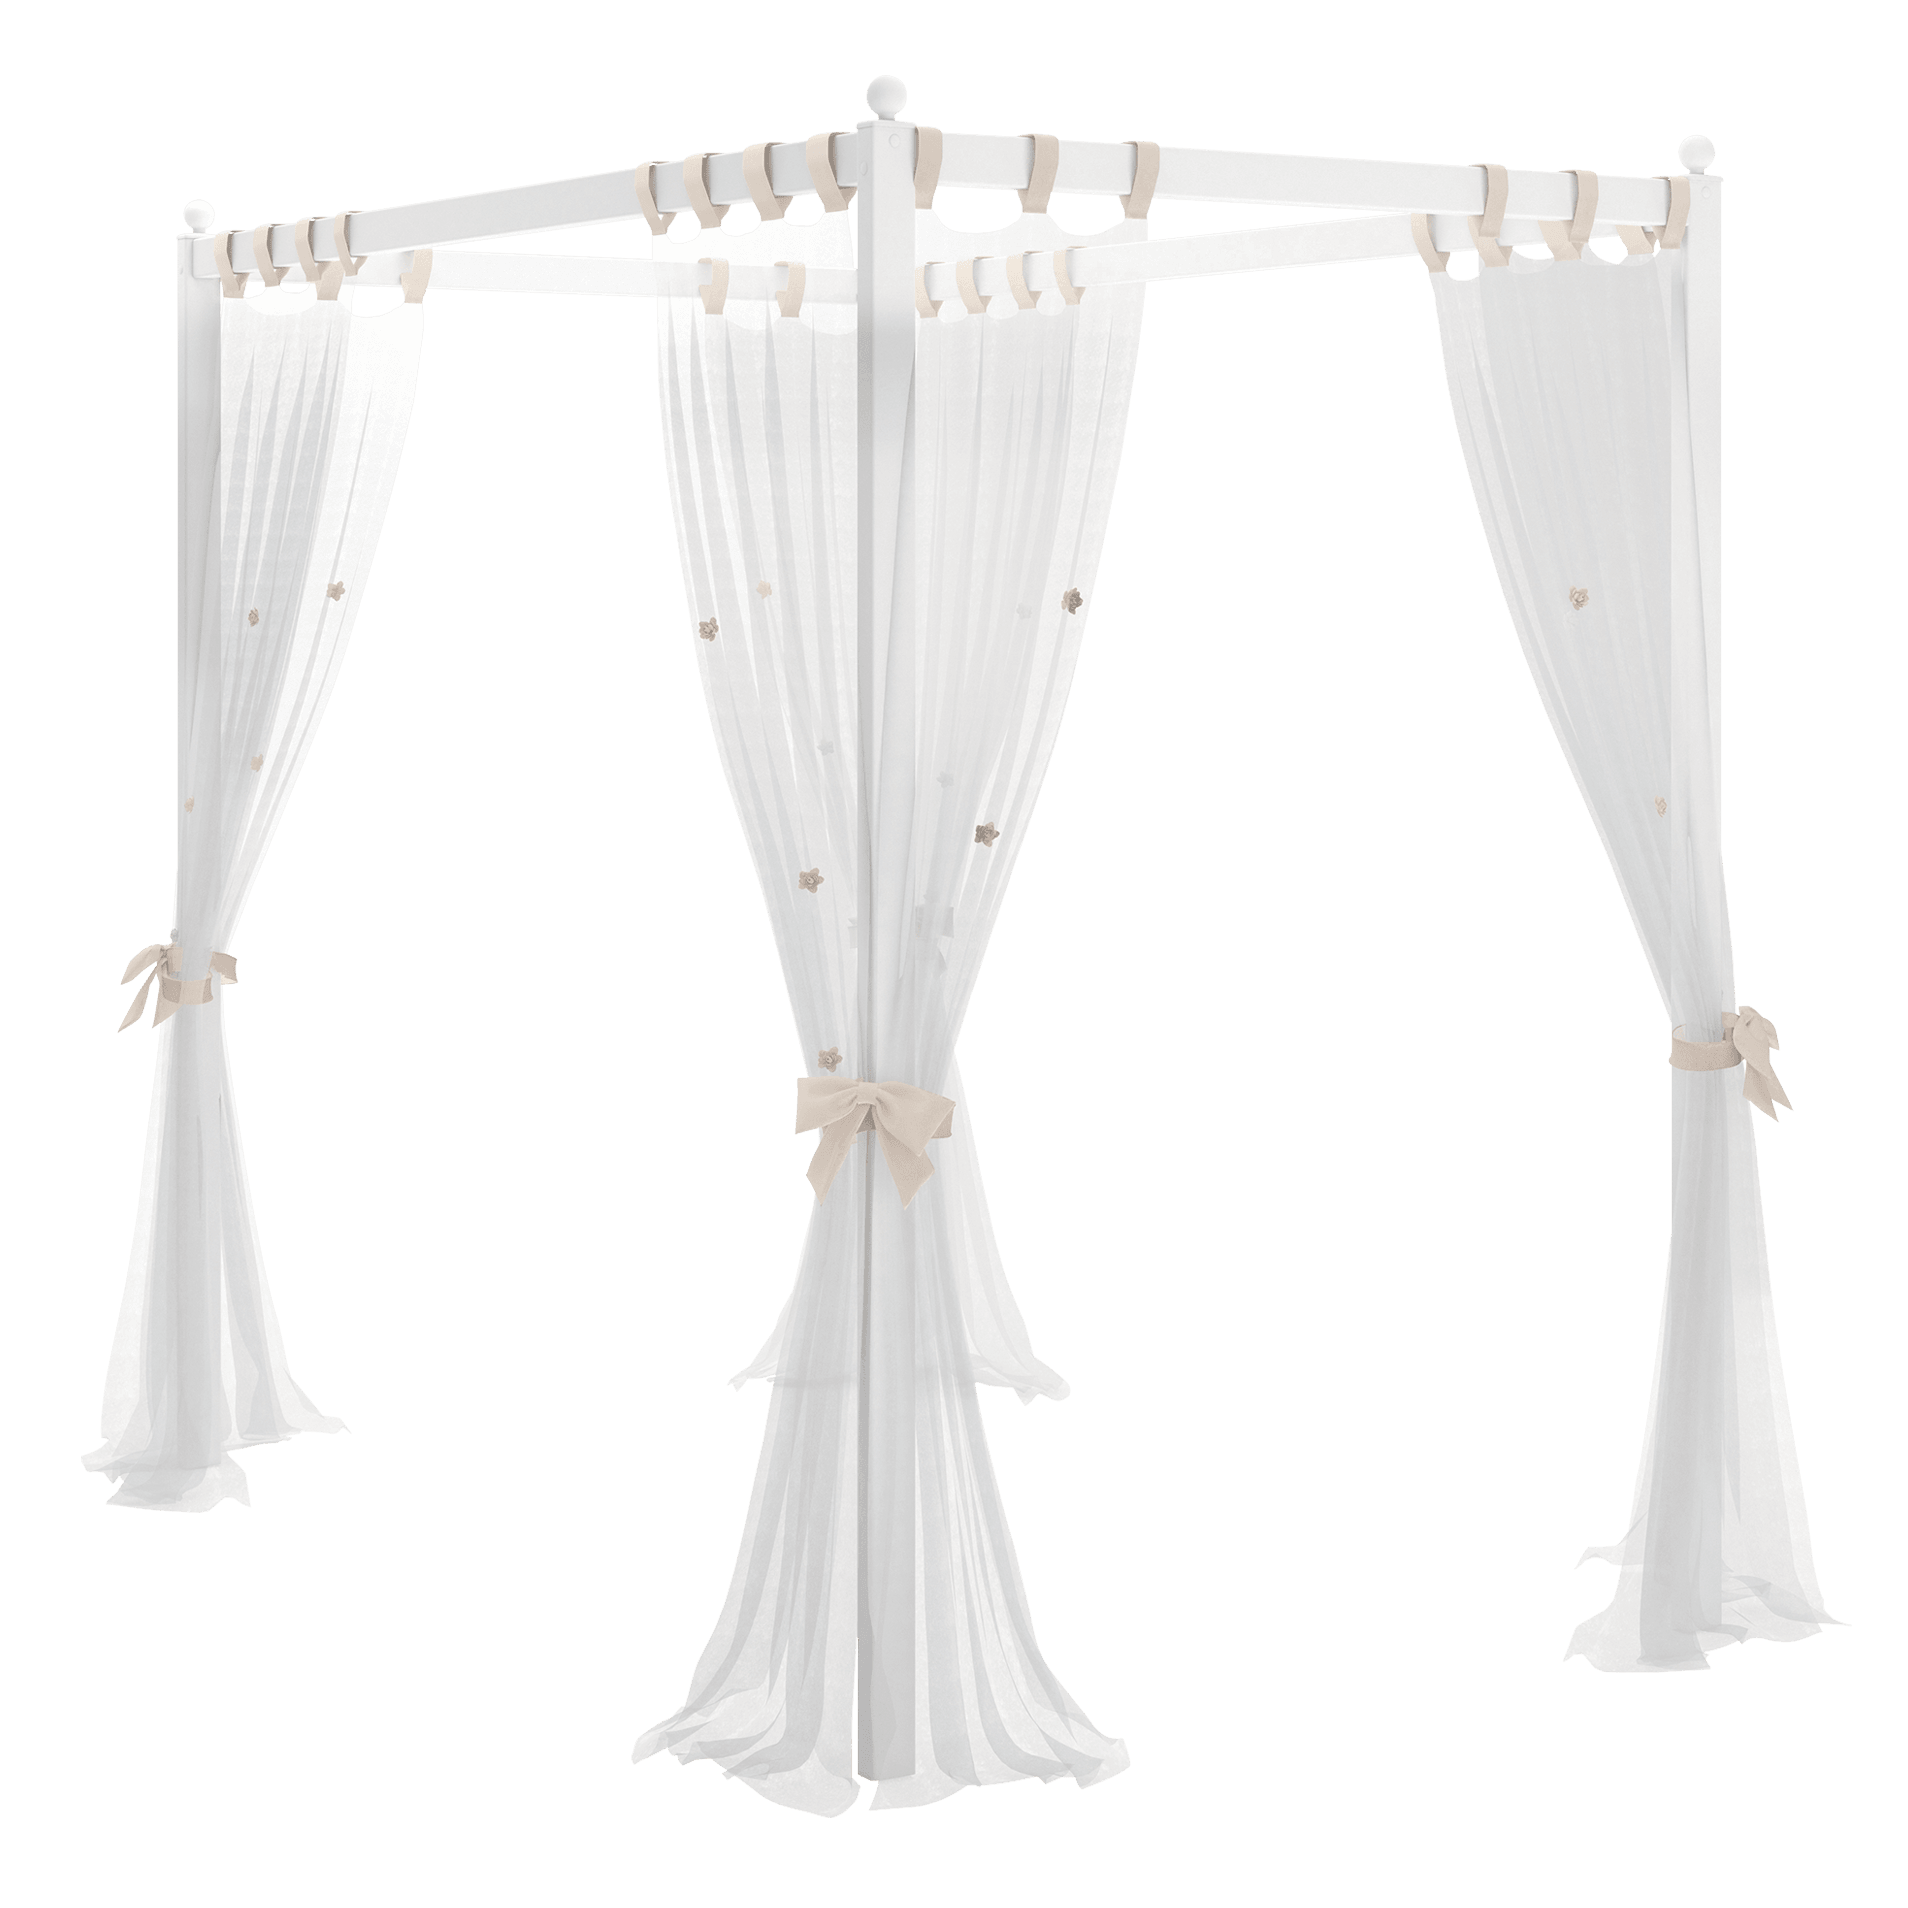 Cilek Rustic White Canopy Poster Poles Only (100x200 or 120x200cm) - Kids Haven